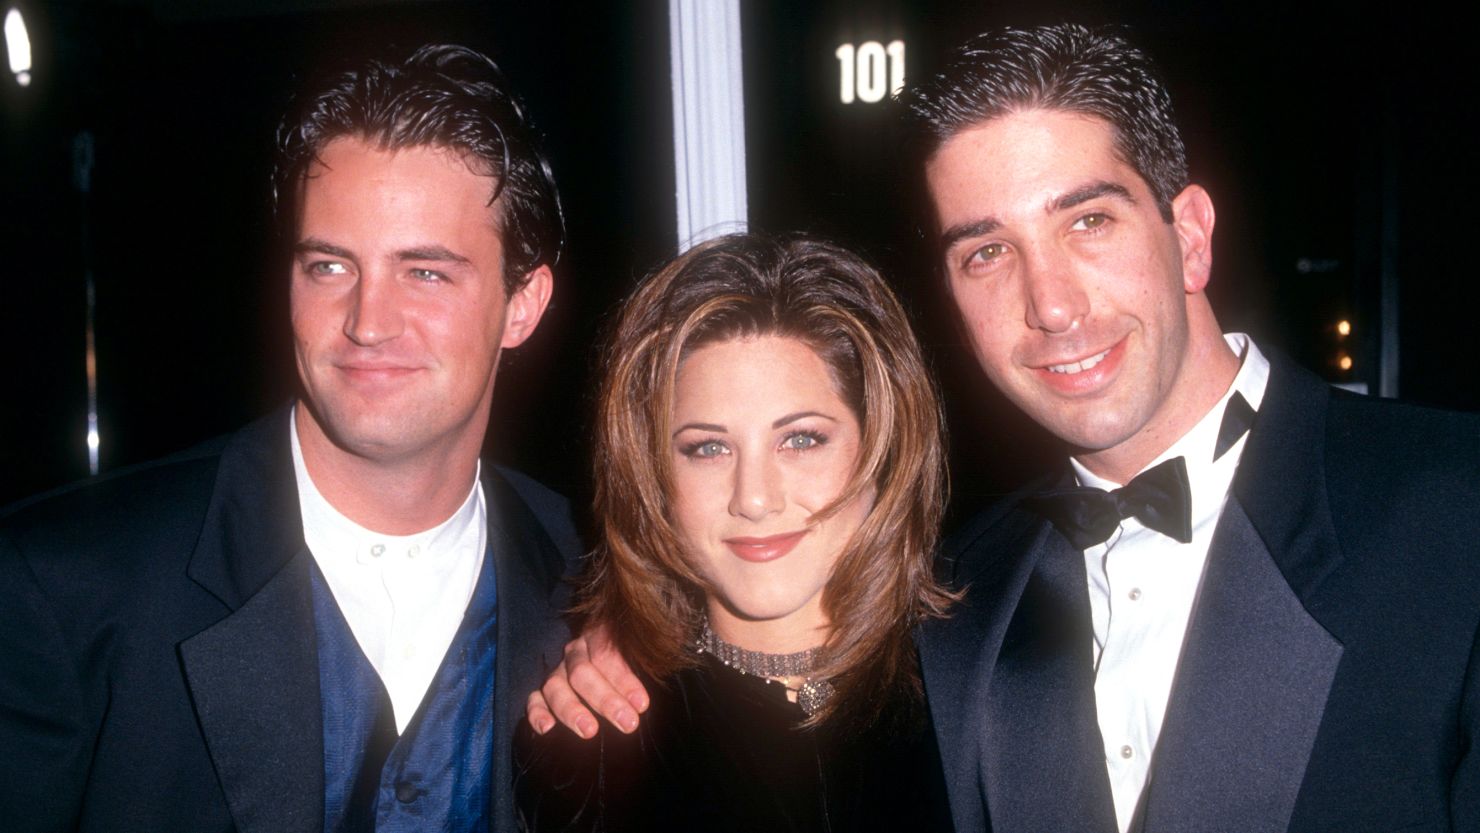 Matthew Perry, Jennifer Aniston and David Schwimmer of the TV show Friend's attend the 21st Annual People's Choice Awards on March 5, 1995 at the Universal Studios in Universal City, California.